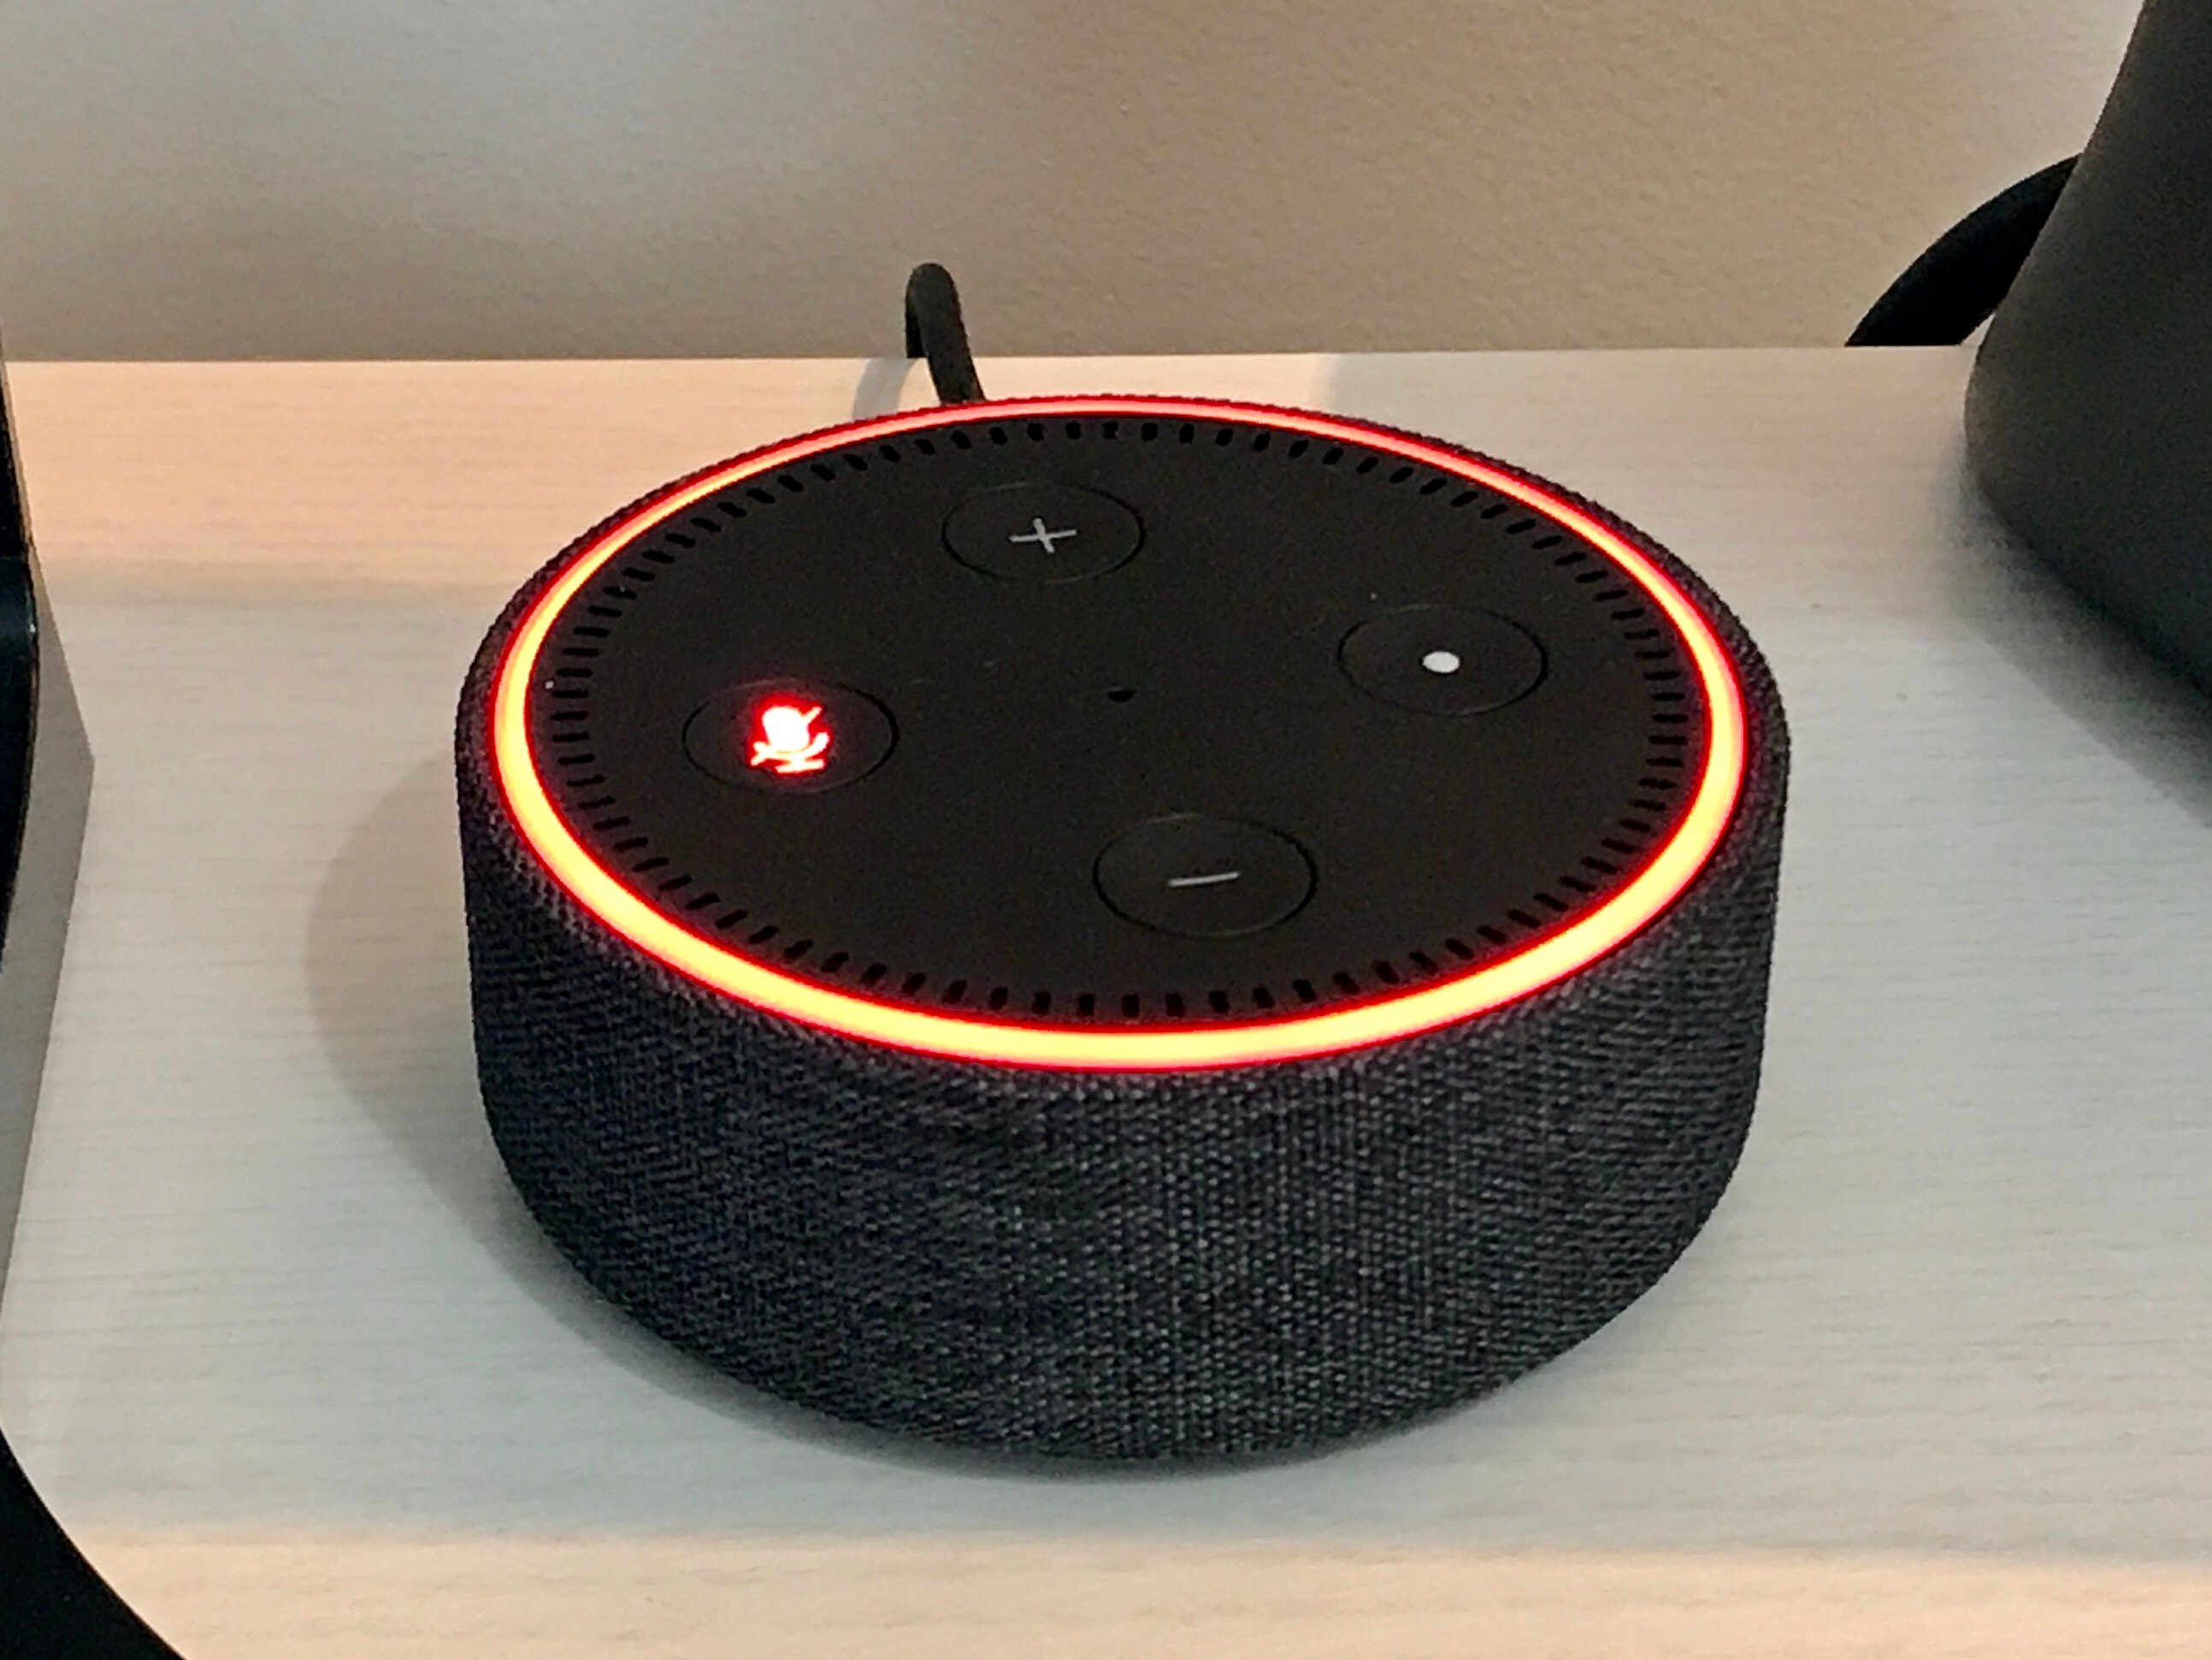 This is how to make the Amazon Echo stop listening.